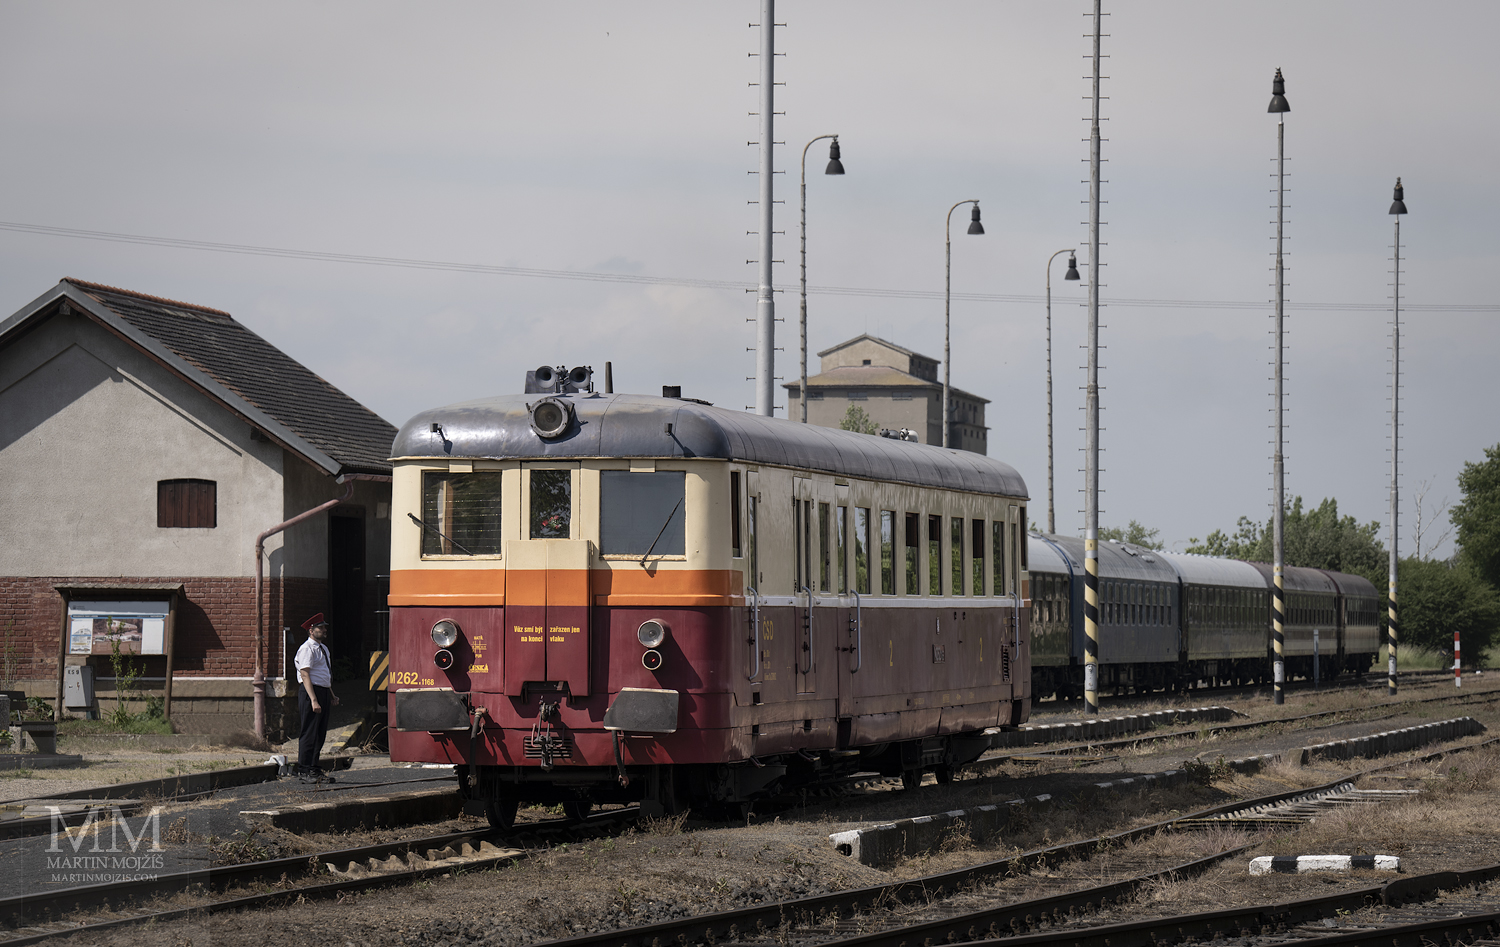 A dispatcher talks to a engine driver of a engine railway car M 262.1168, standing at the railway station. Fine art photograph UNDER RIP HILL LITTLE RAILCAR II, photographed by Martin Mojzis.